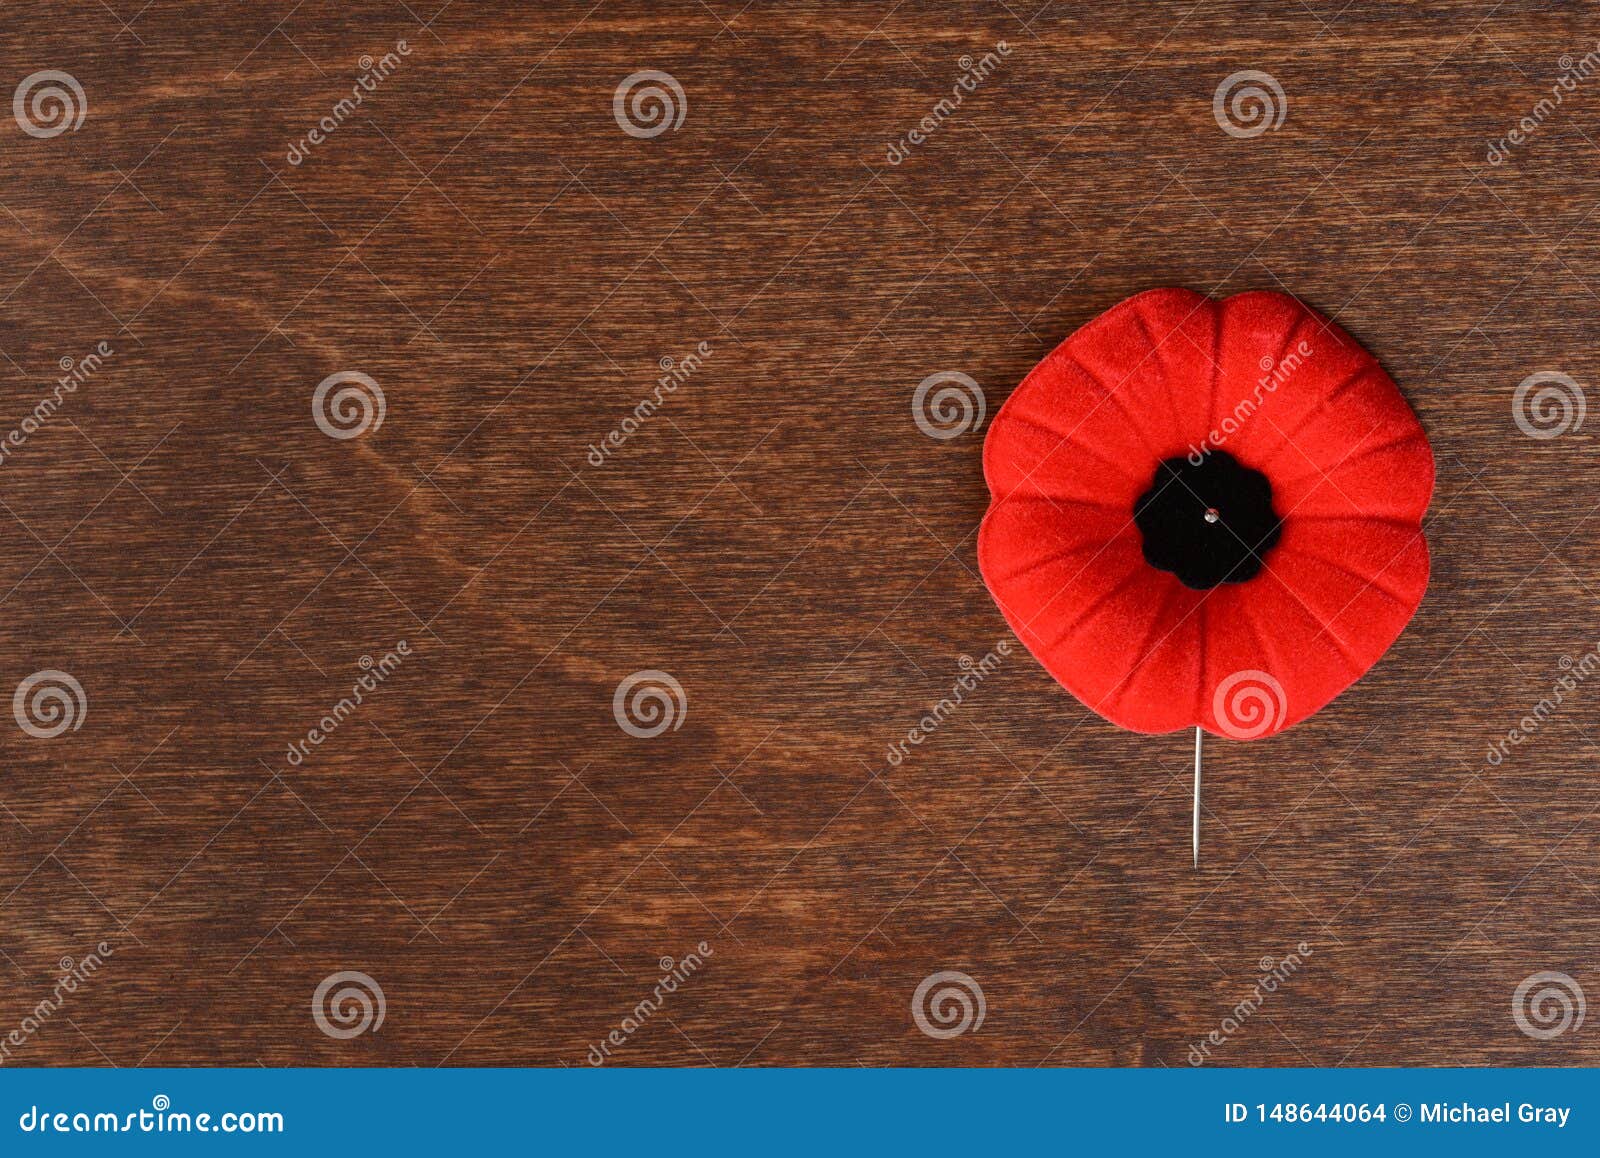 top view remembrance day poppy